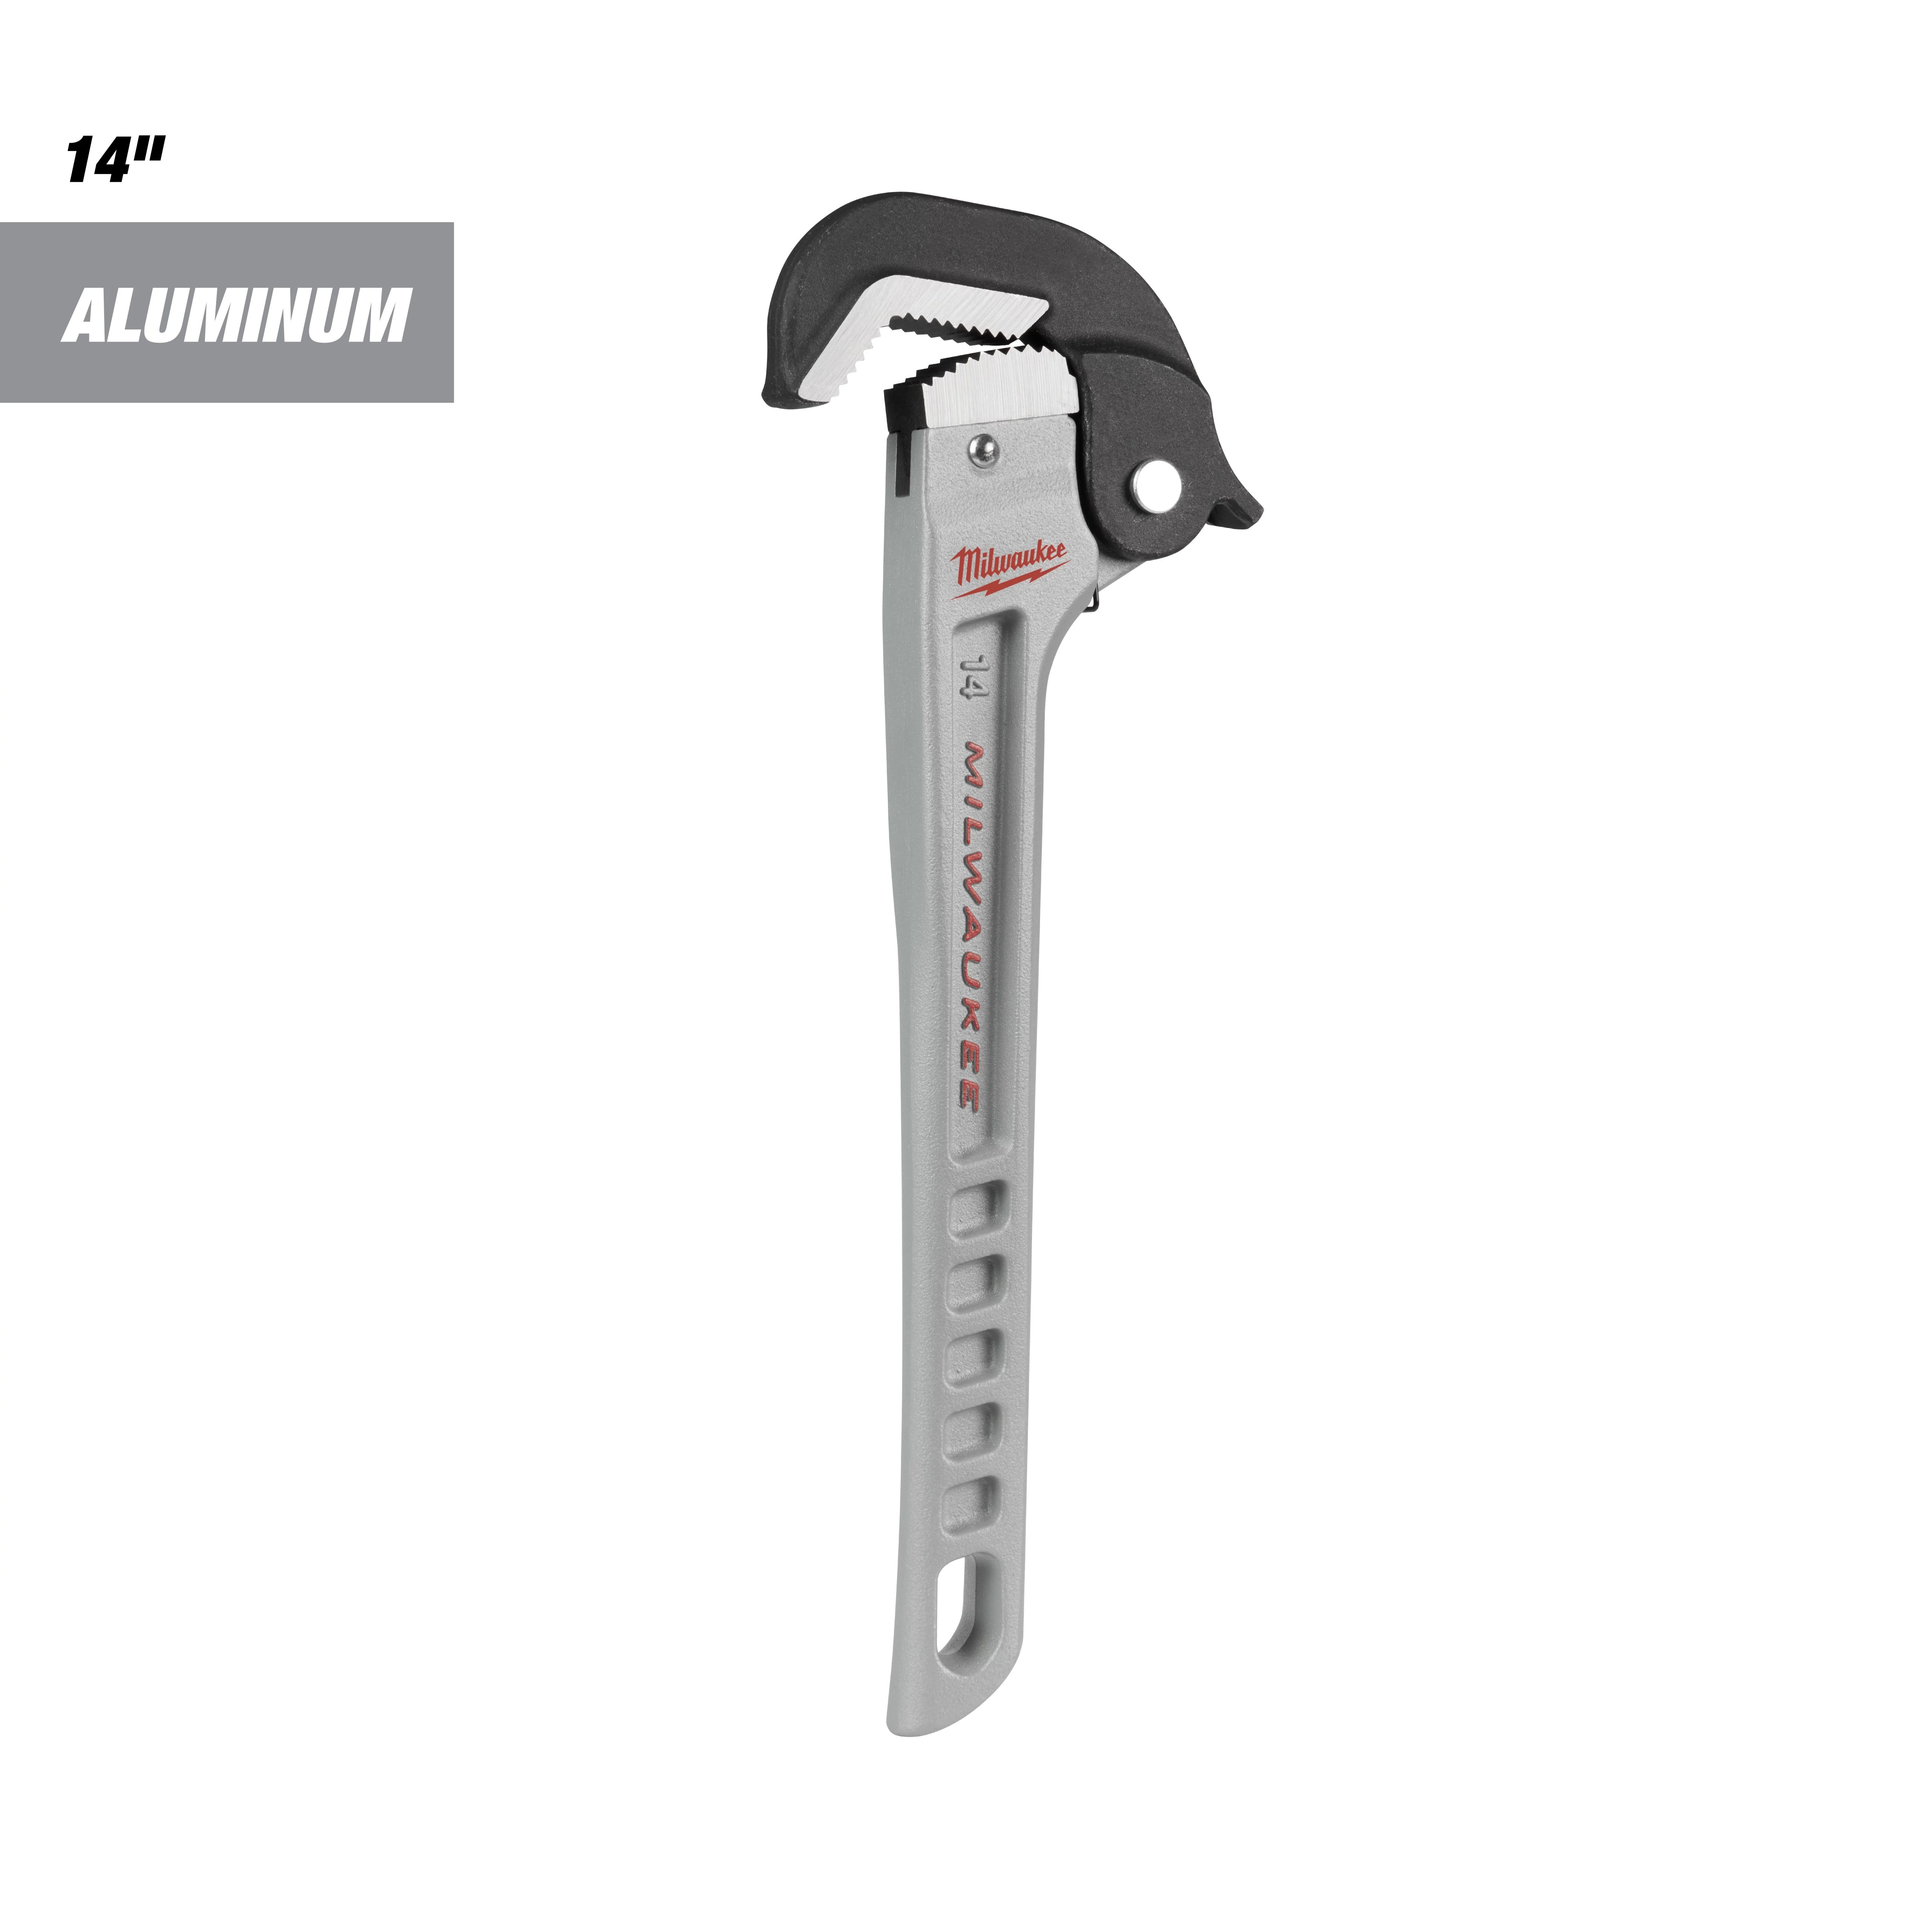 Aluminum Self-Adjusting Pipe Wrenches - 14"